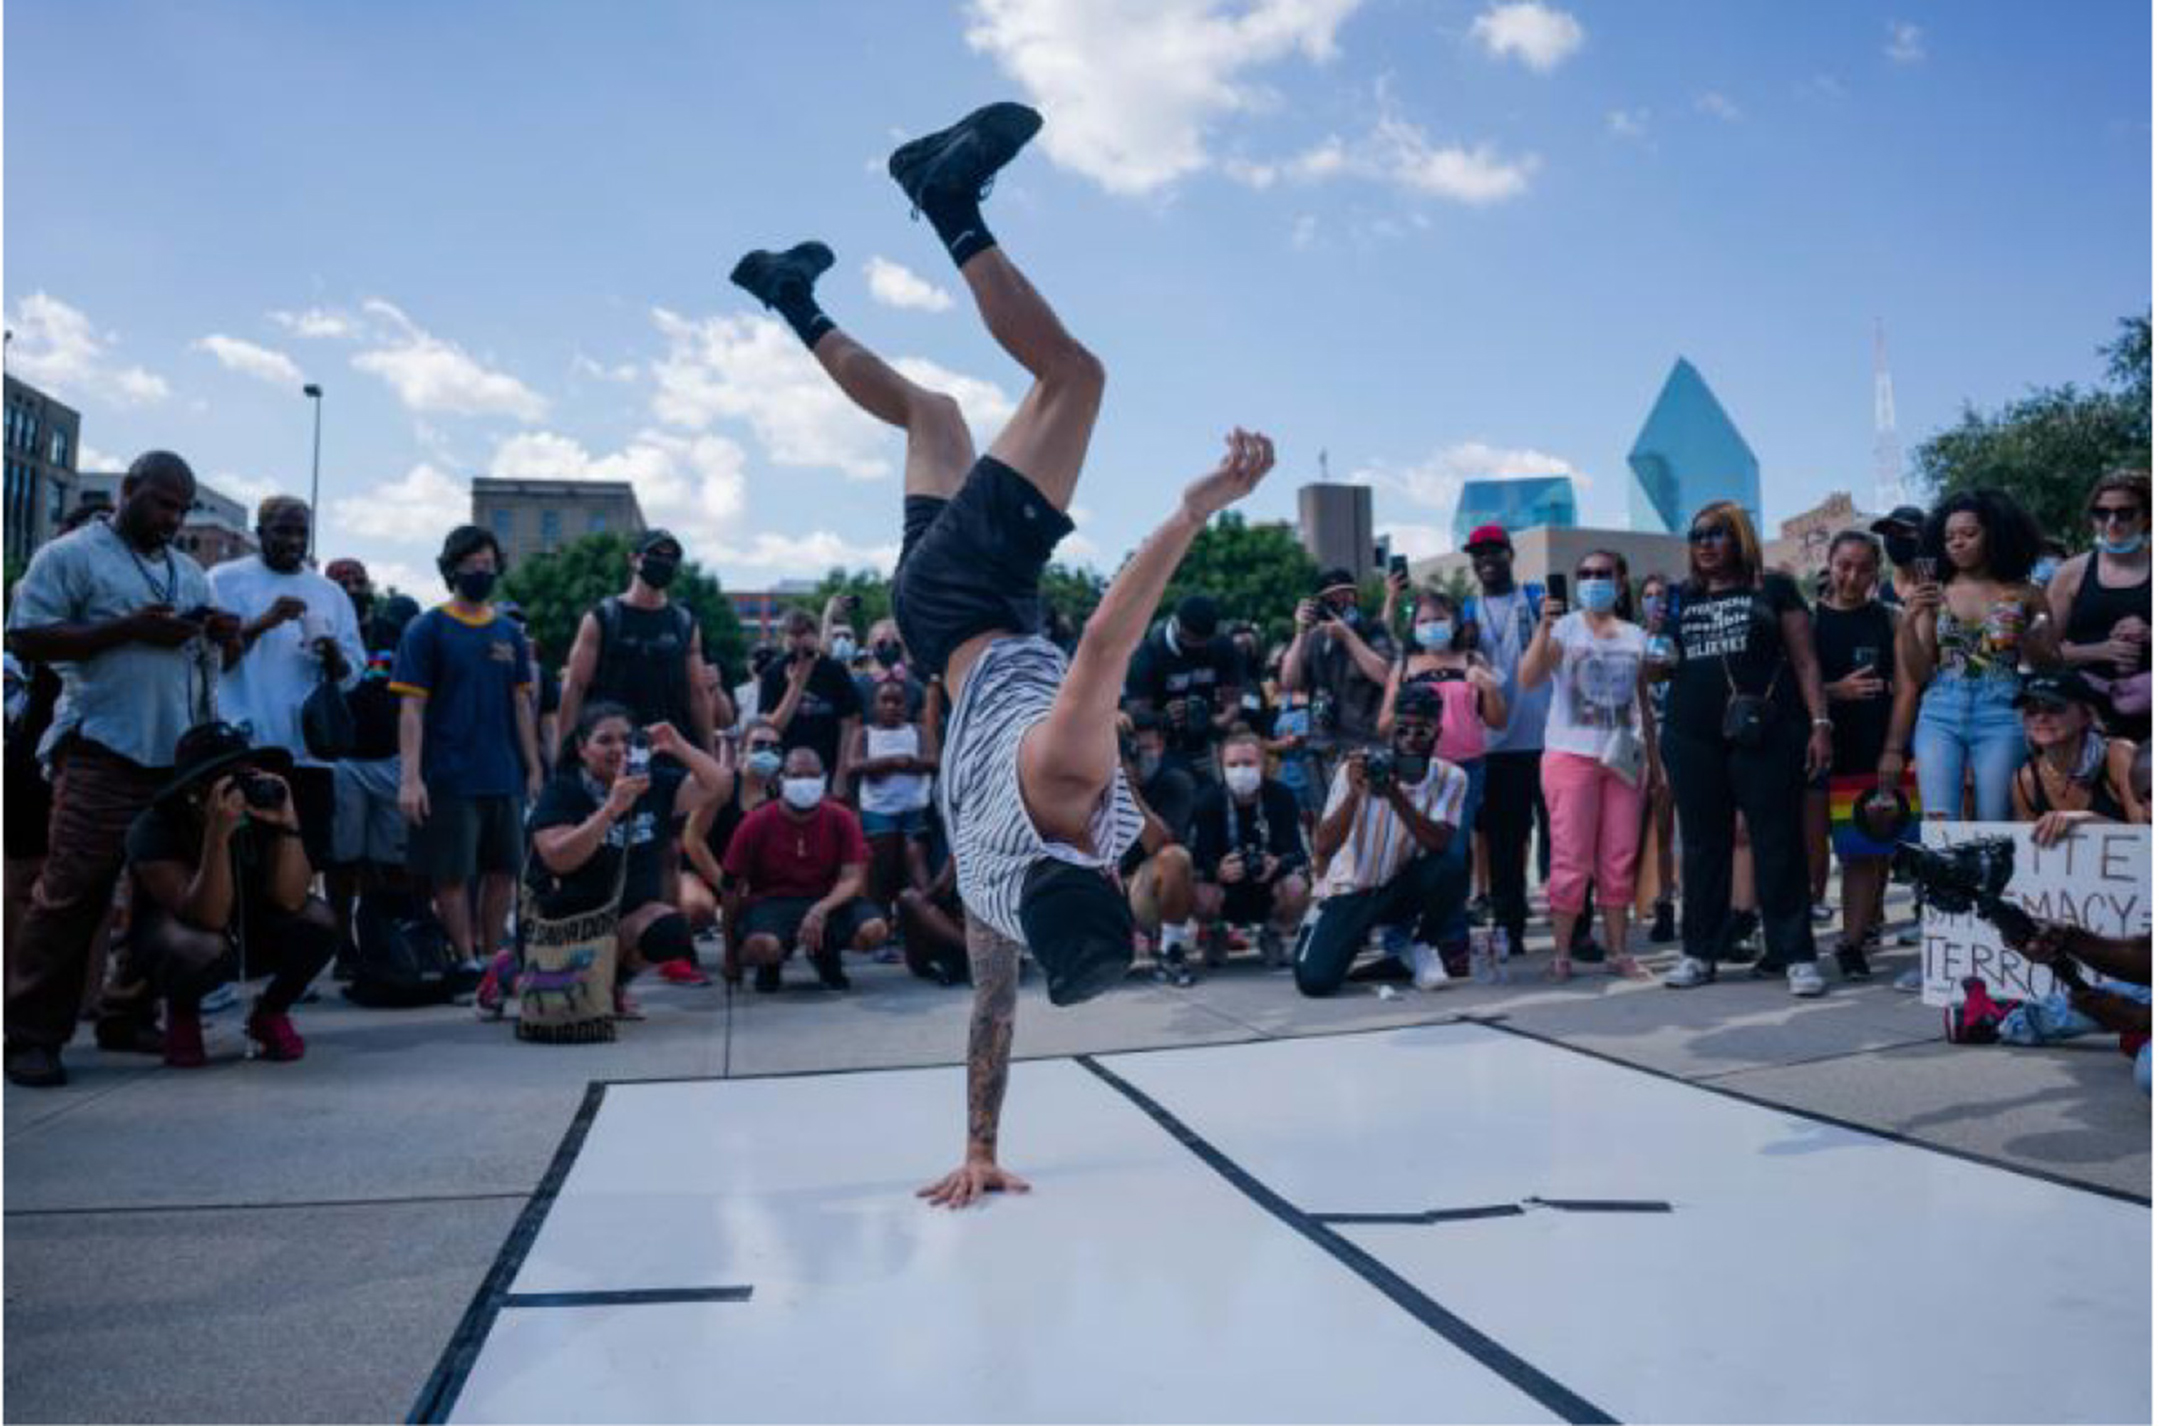 Color photograph of a white man breakdancing for a crowd